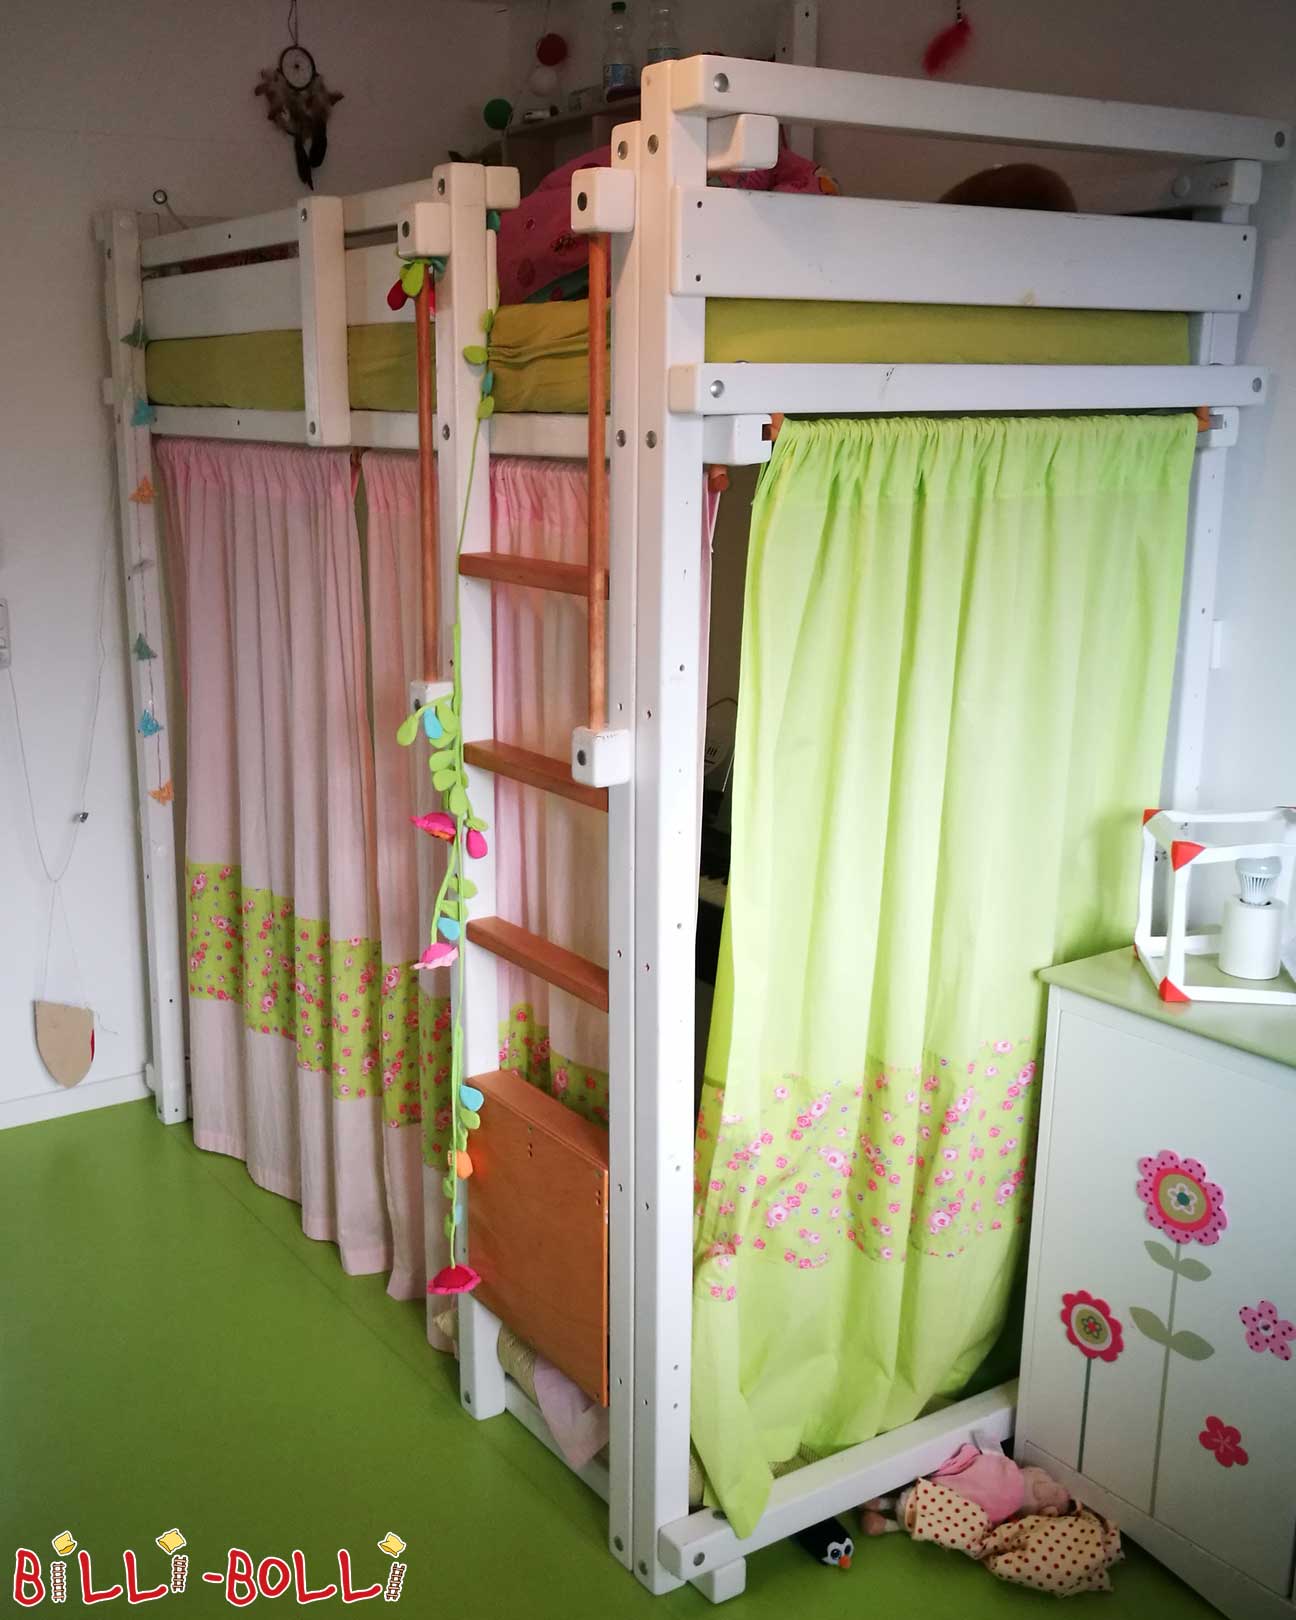 Loft bed that grows with the child - a girl's dream comes true (Category: second hand loft bed)